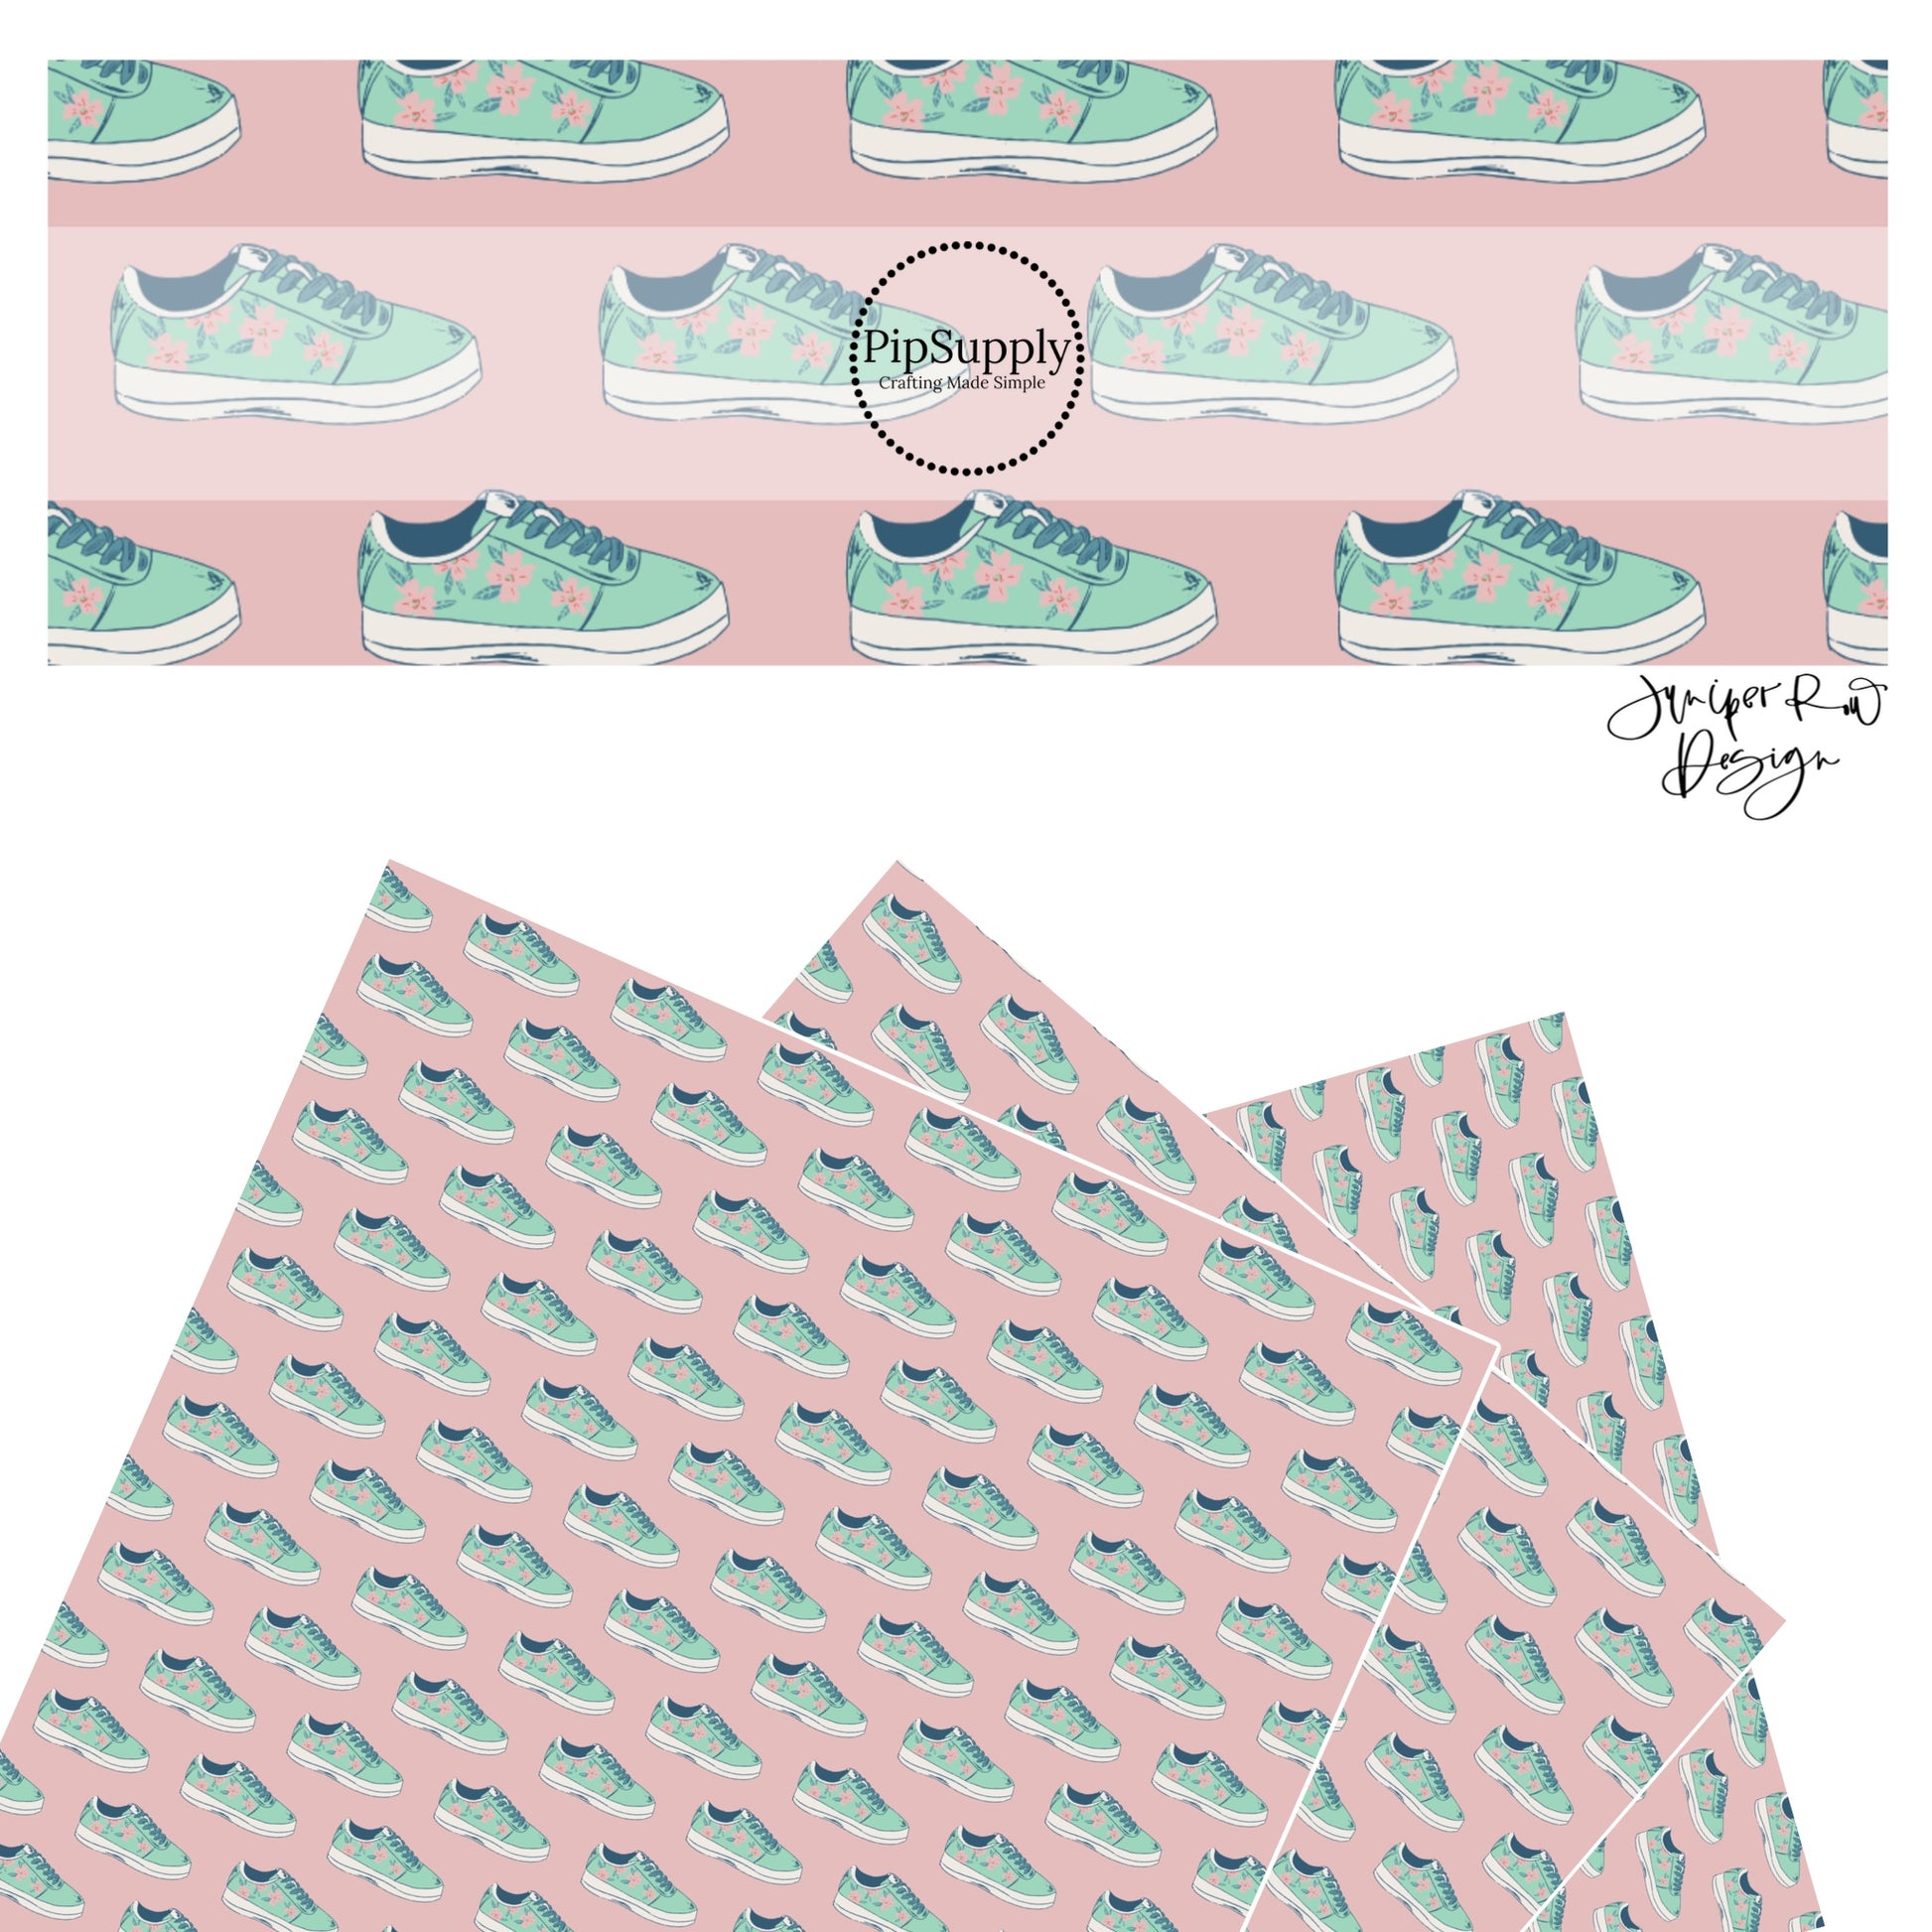 Pink flowers on aqua shoes on pink faux leather sheets